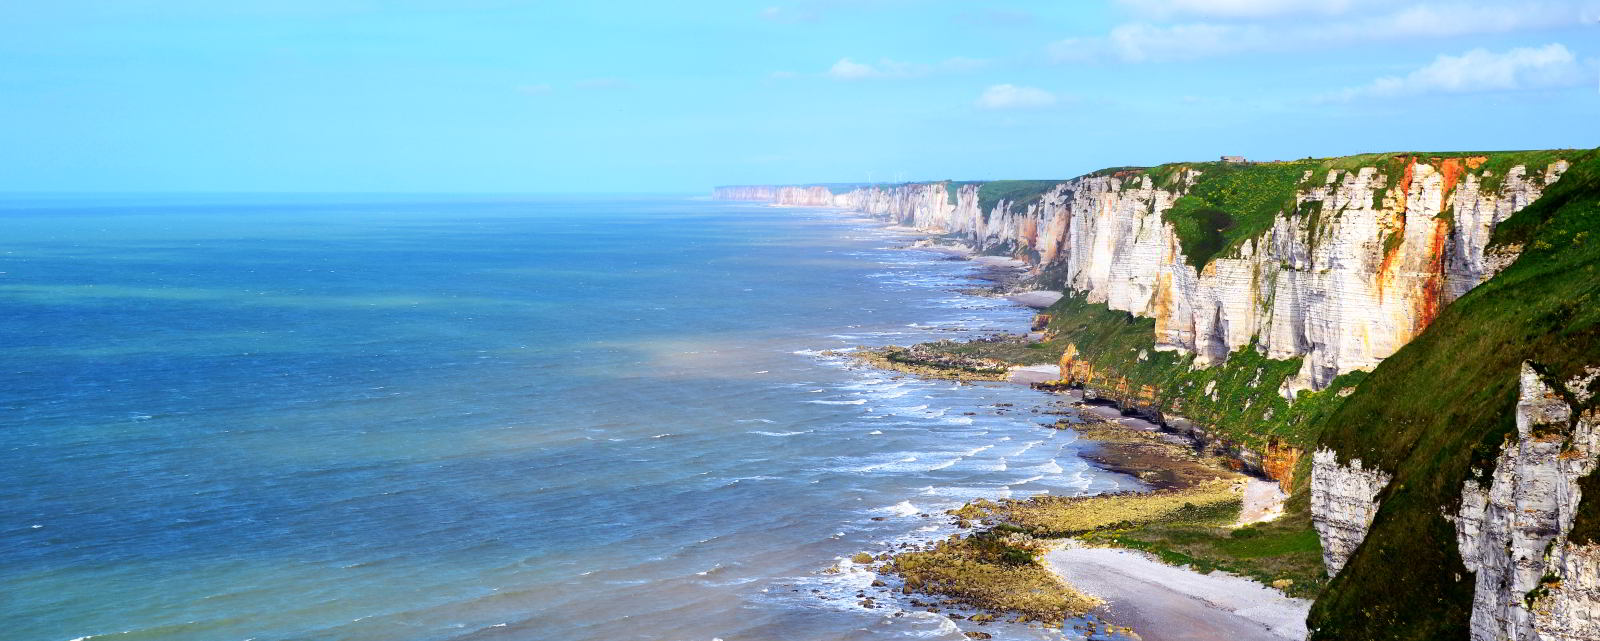 Normandy Côte d'Albatre picture. Normandy Luxury Holidays with In-Luxe Travel France, The specialist of luxury bespoke holidays in France since 2007